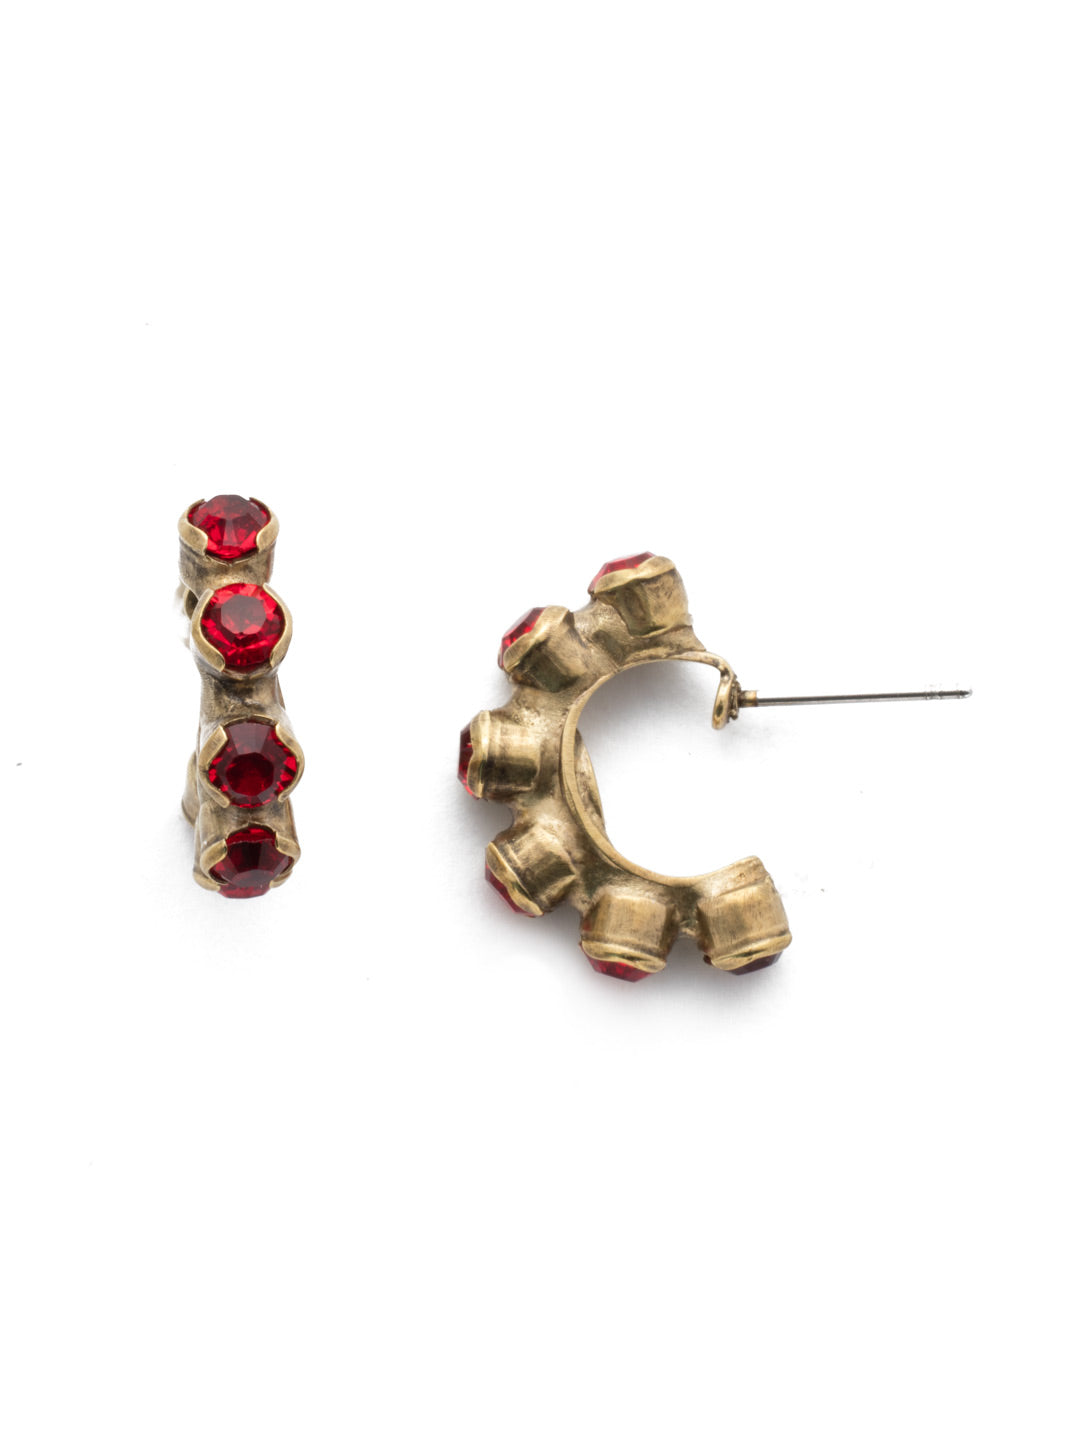 Maisie Hoop Earring - EEF49AGSNR - These eye-catching diamond encrusted hoops are sure to elevate any look. Pair these hoops with a blazer or a party dress to effortlessly complement any look. From Sorrelli's Sansa Red collection in our Antique Gold-tone finish.